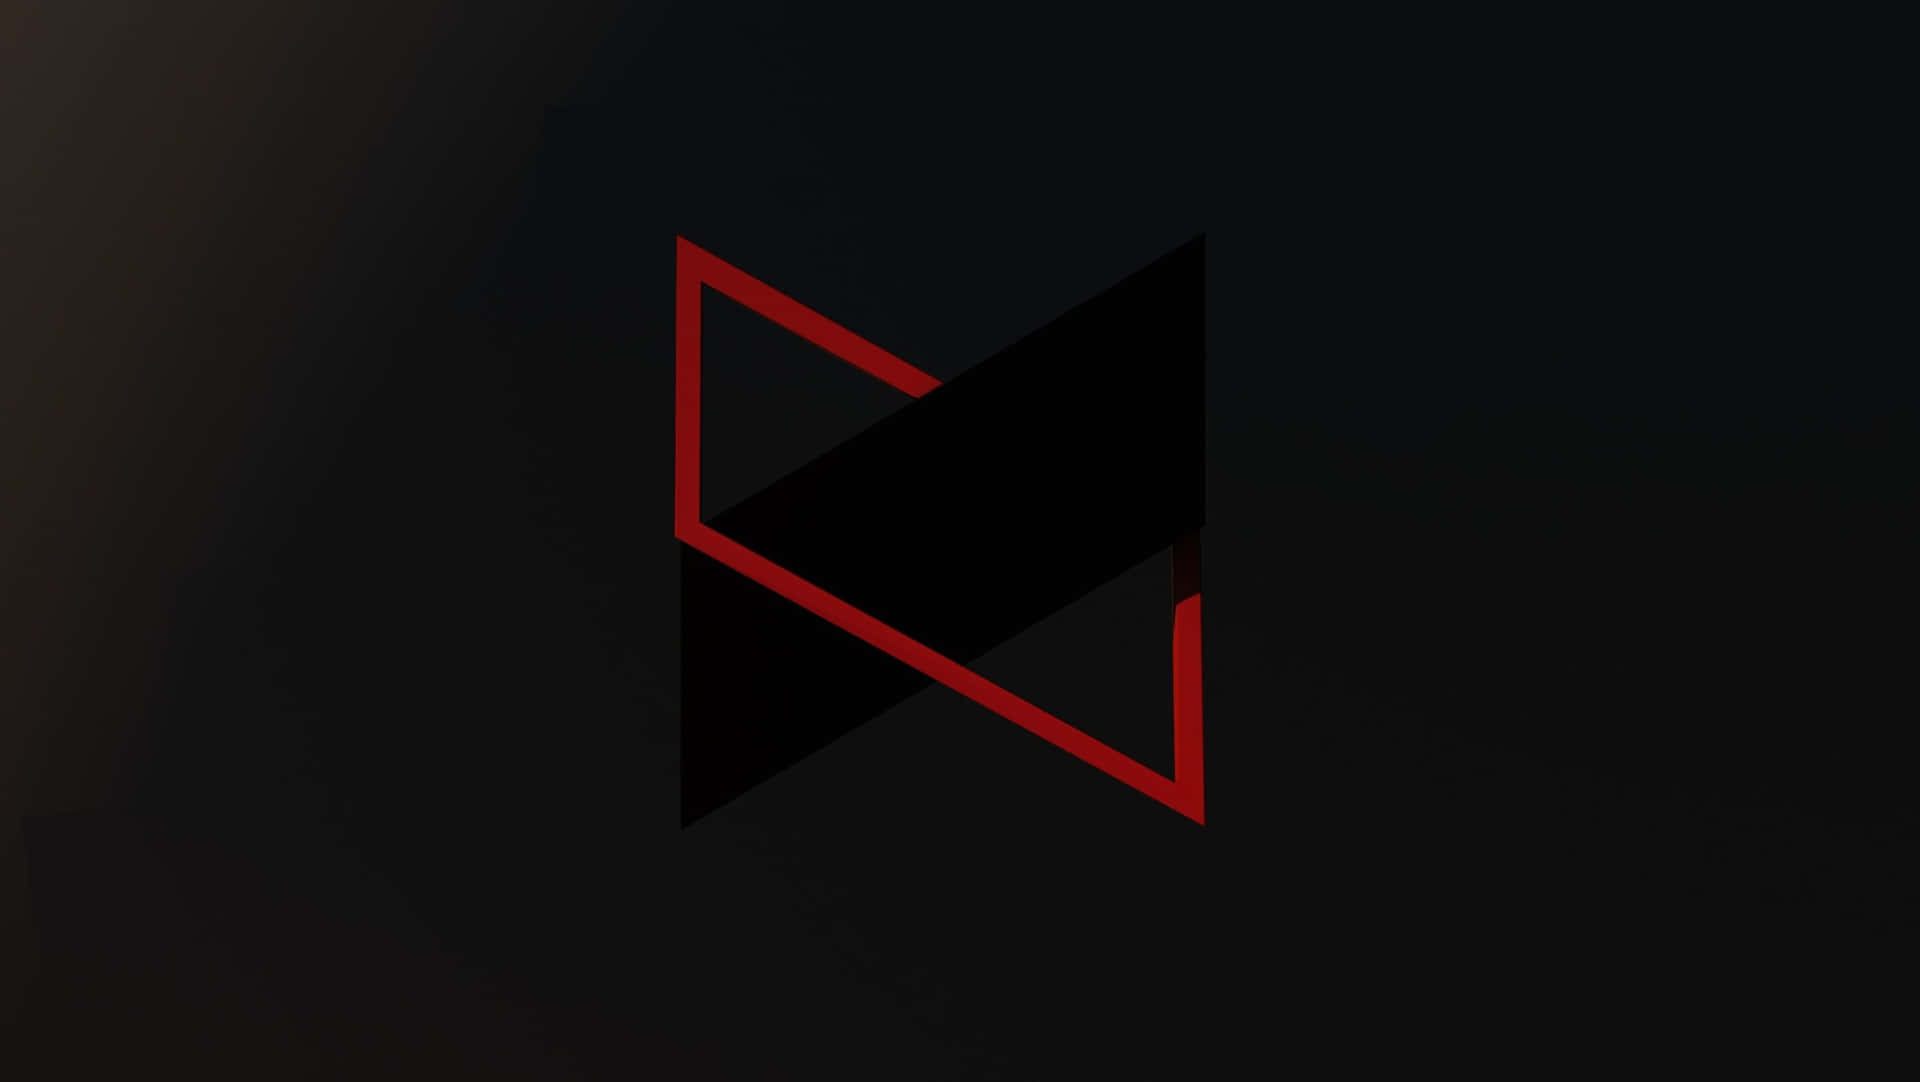 Mkbhd's Signature Logo On A Textured Background Wallpaper